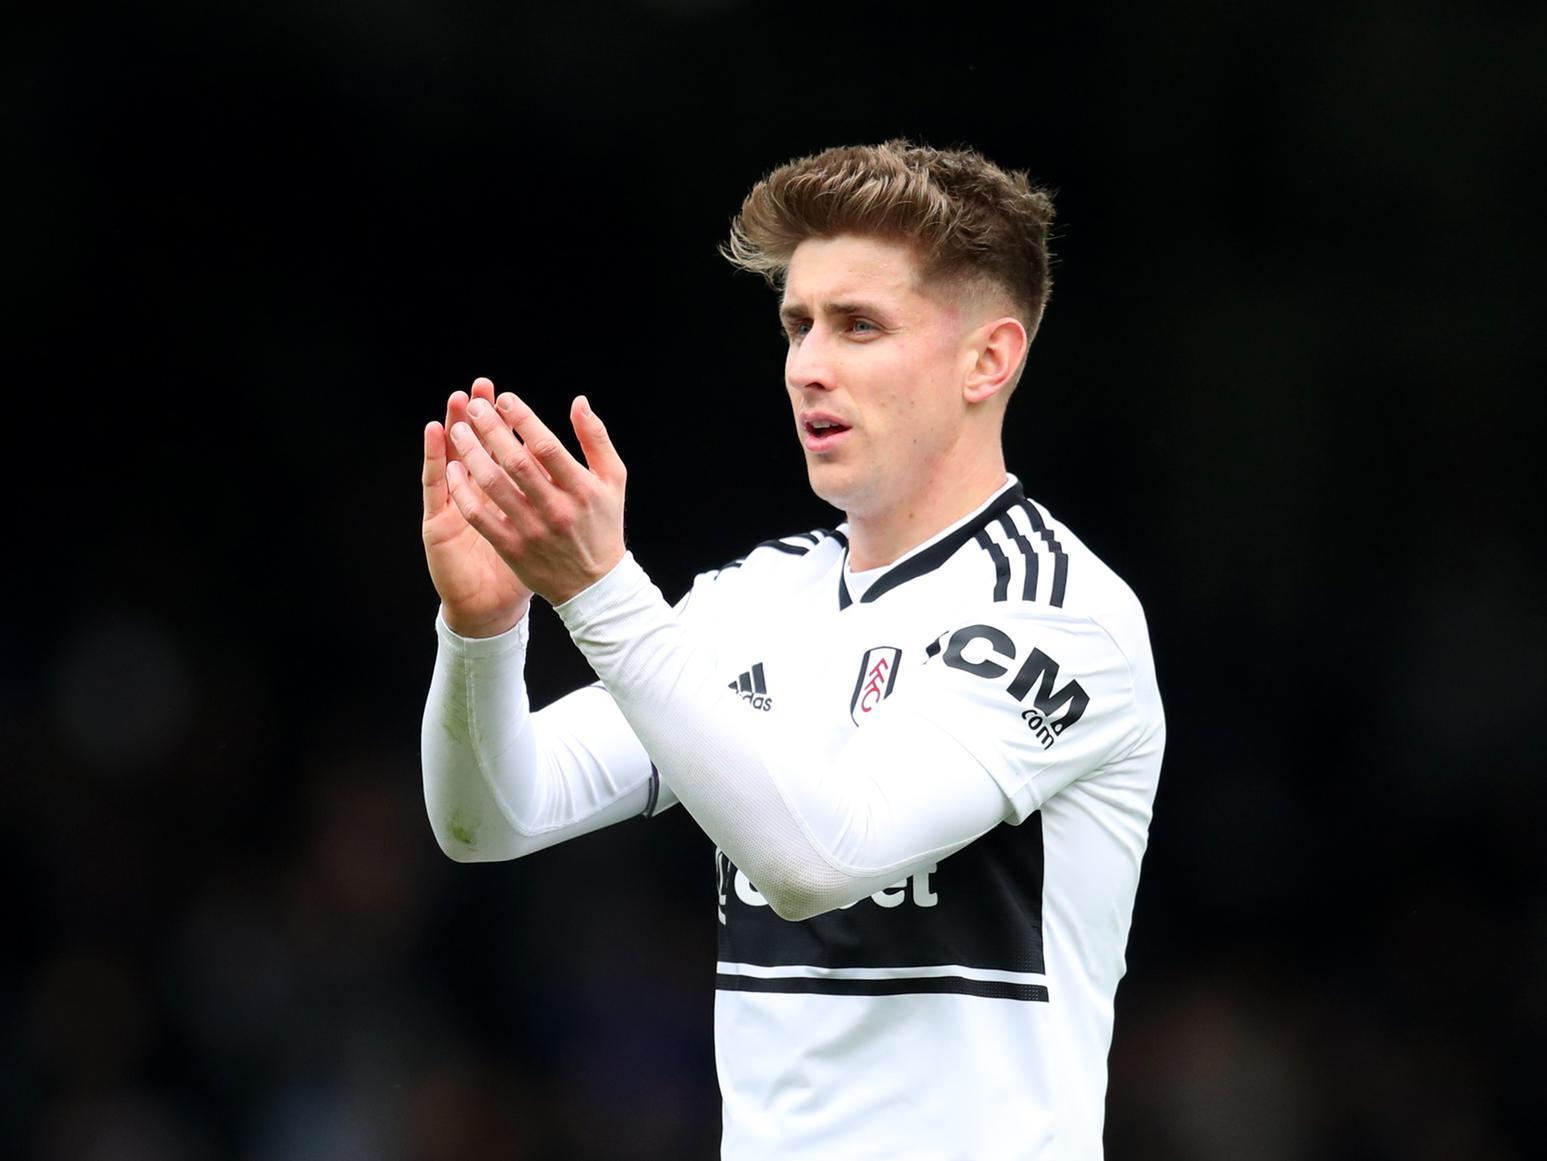 Leeds United boss Marcelo Bielsa is said to be a "huge admirer" of Fulham midfielder Tom Cairney, althoughit is unclear whether he would look to pursue a player with a contract running until 2024. (Football Insider)